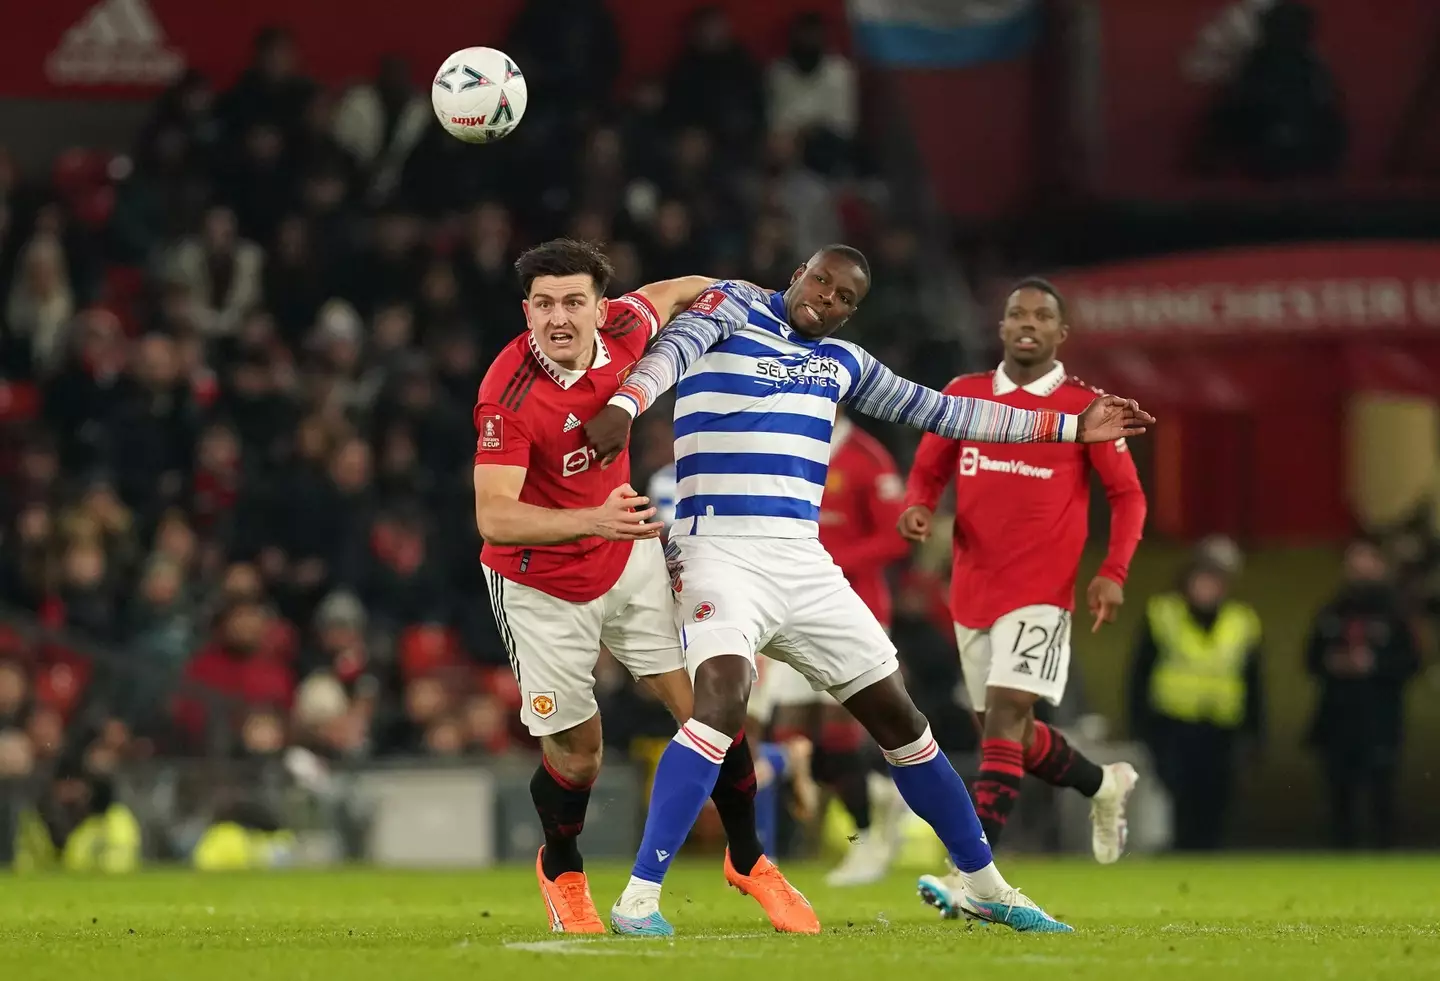 Maguire in action against Reading. (Image